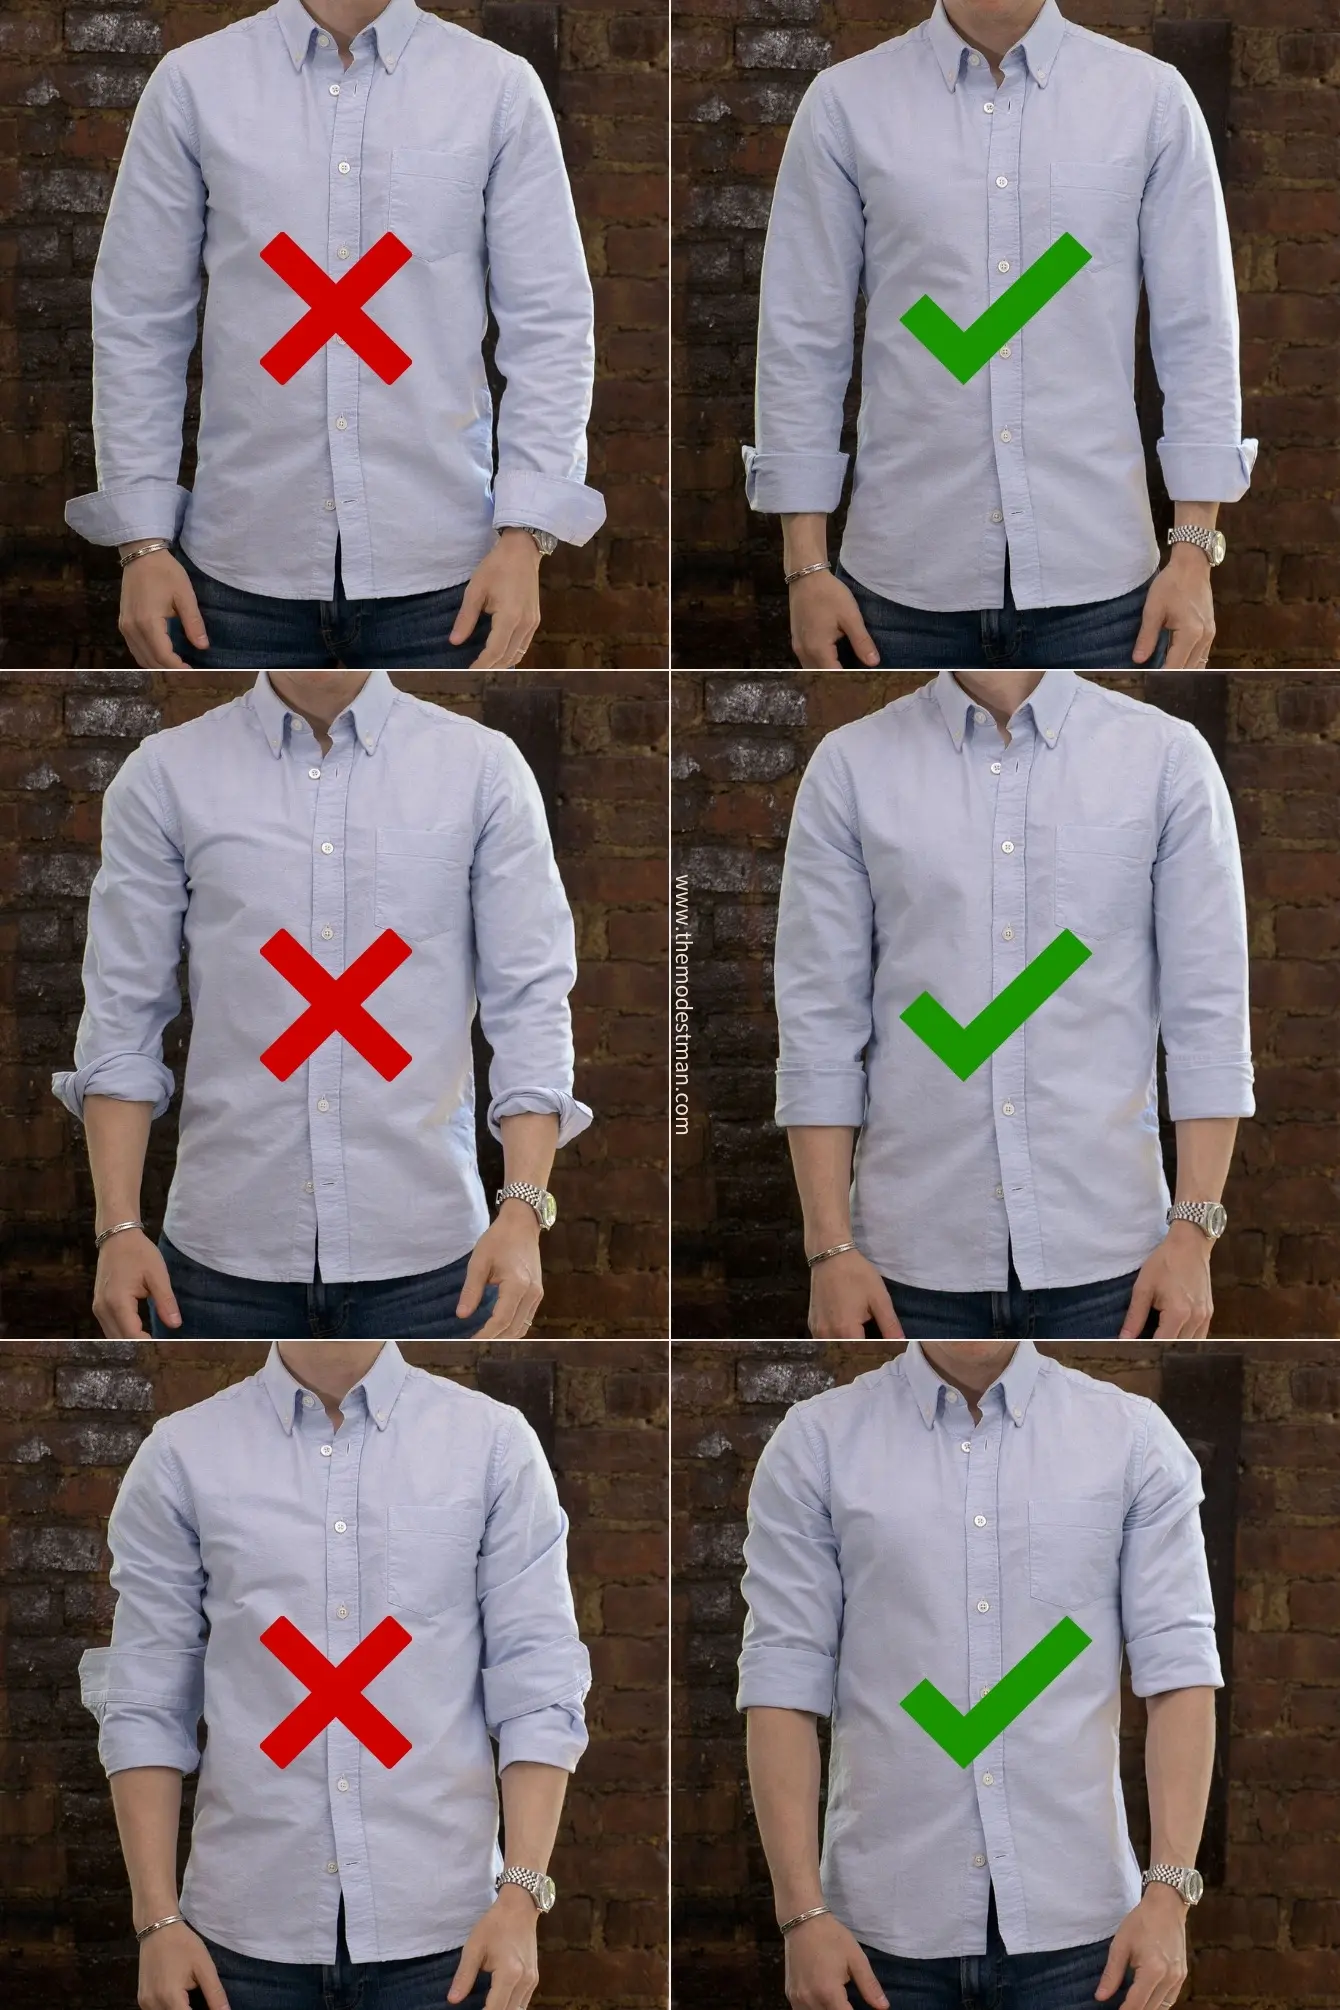 Employee To jump To accelerate 7 Ways to Roll Your Shirt Sleeves Up (Visual Guide) (Visual Guide)